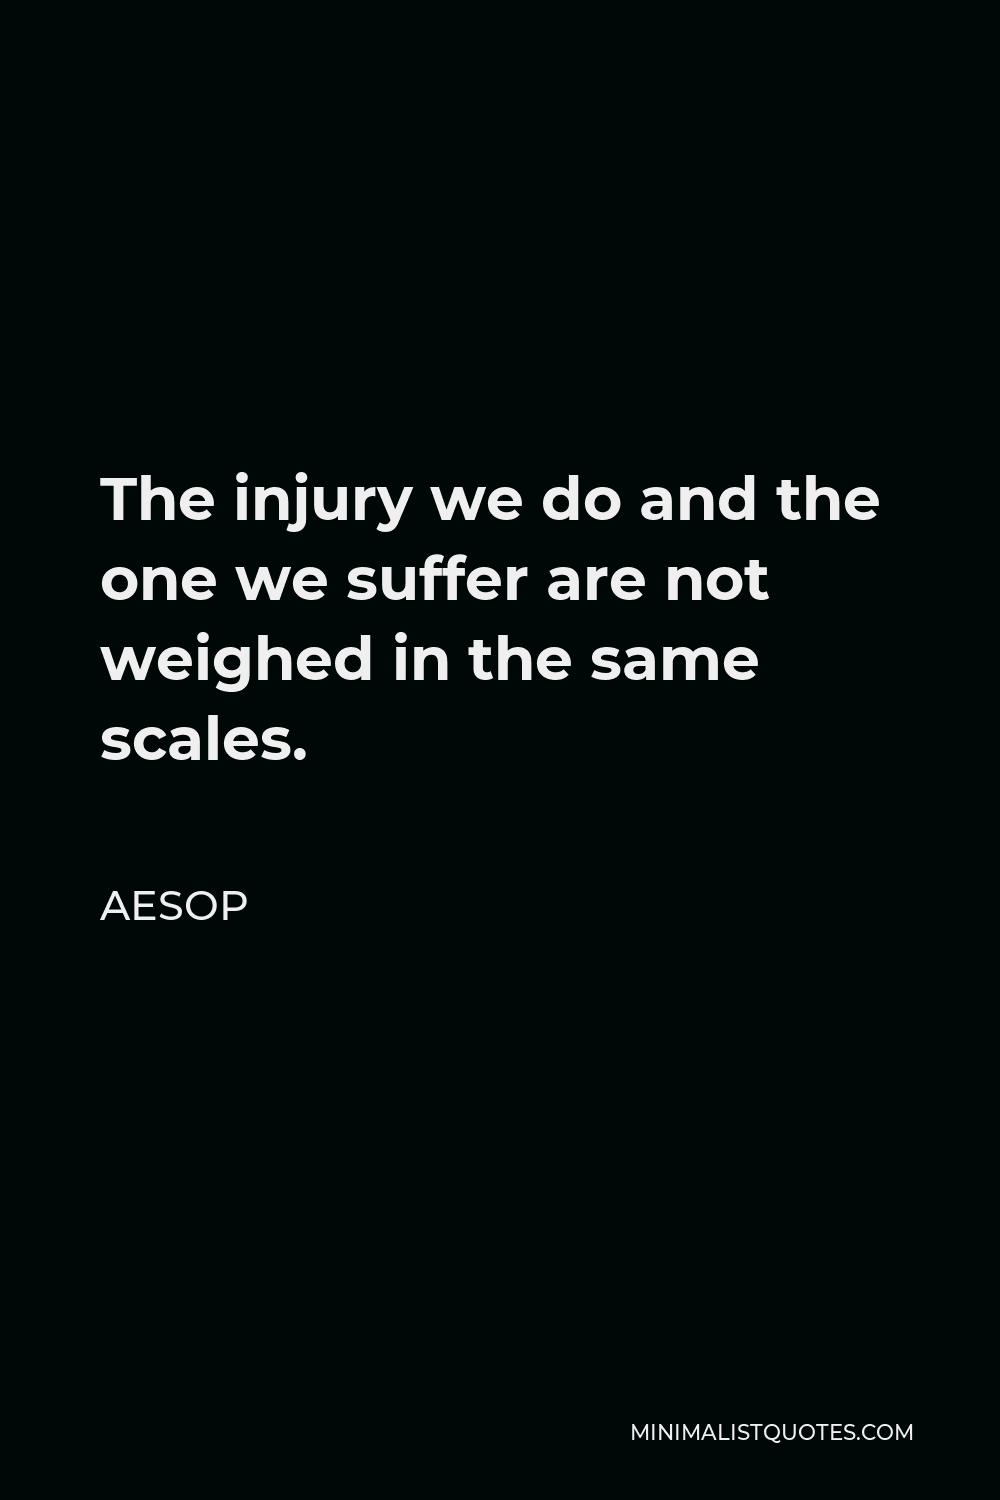 Aesop Quote - The injury we do and the one we suffer are not weighed in the same scales.